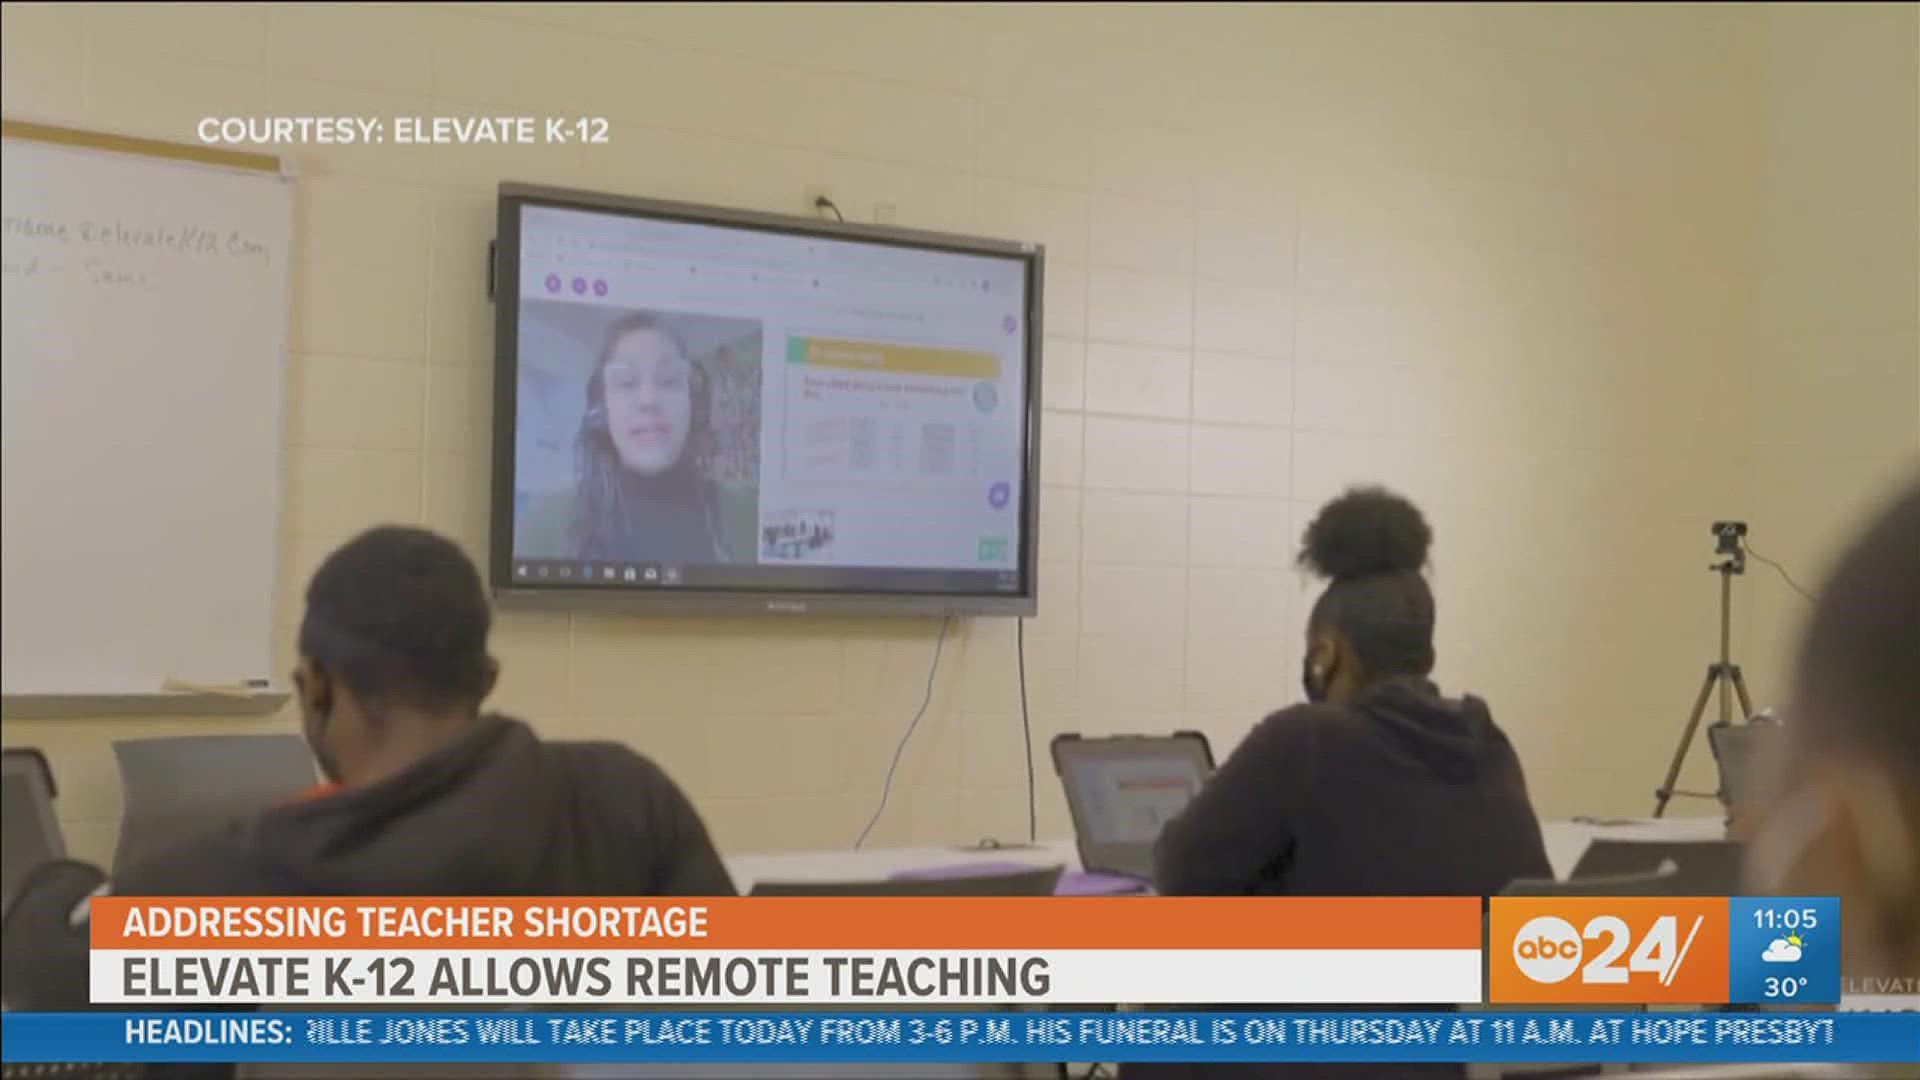 Elevate K-12 has certified teachers who can remotely teach classes across the county. Students are in classrooms, but the teachers are virtual.